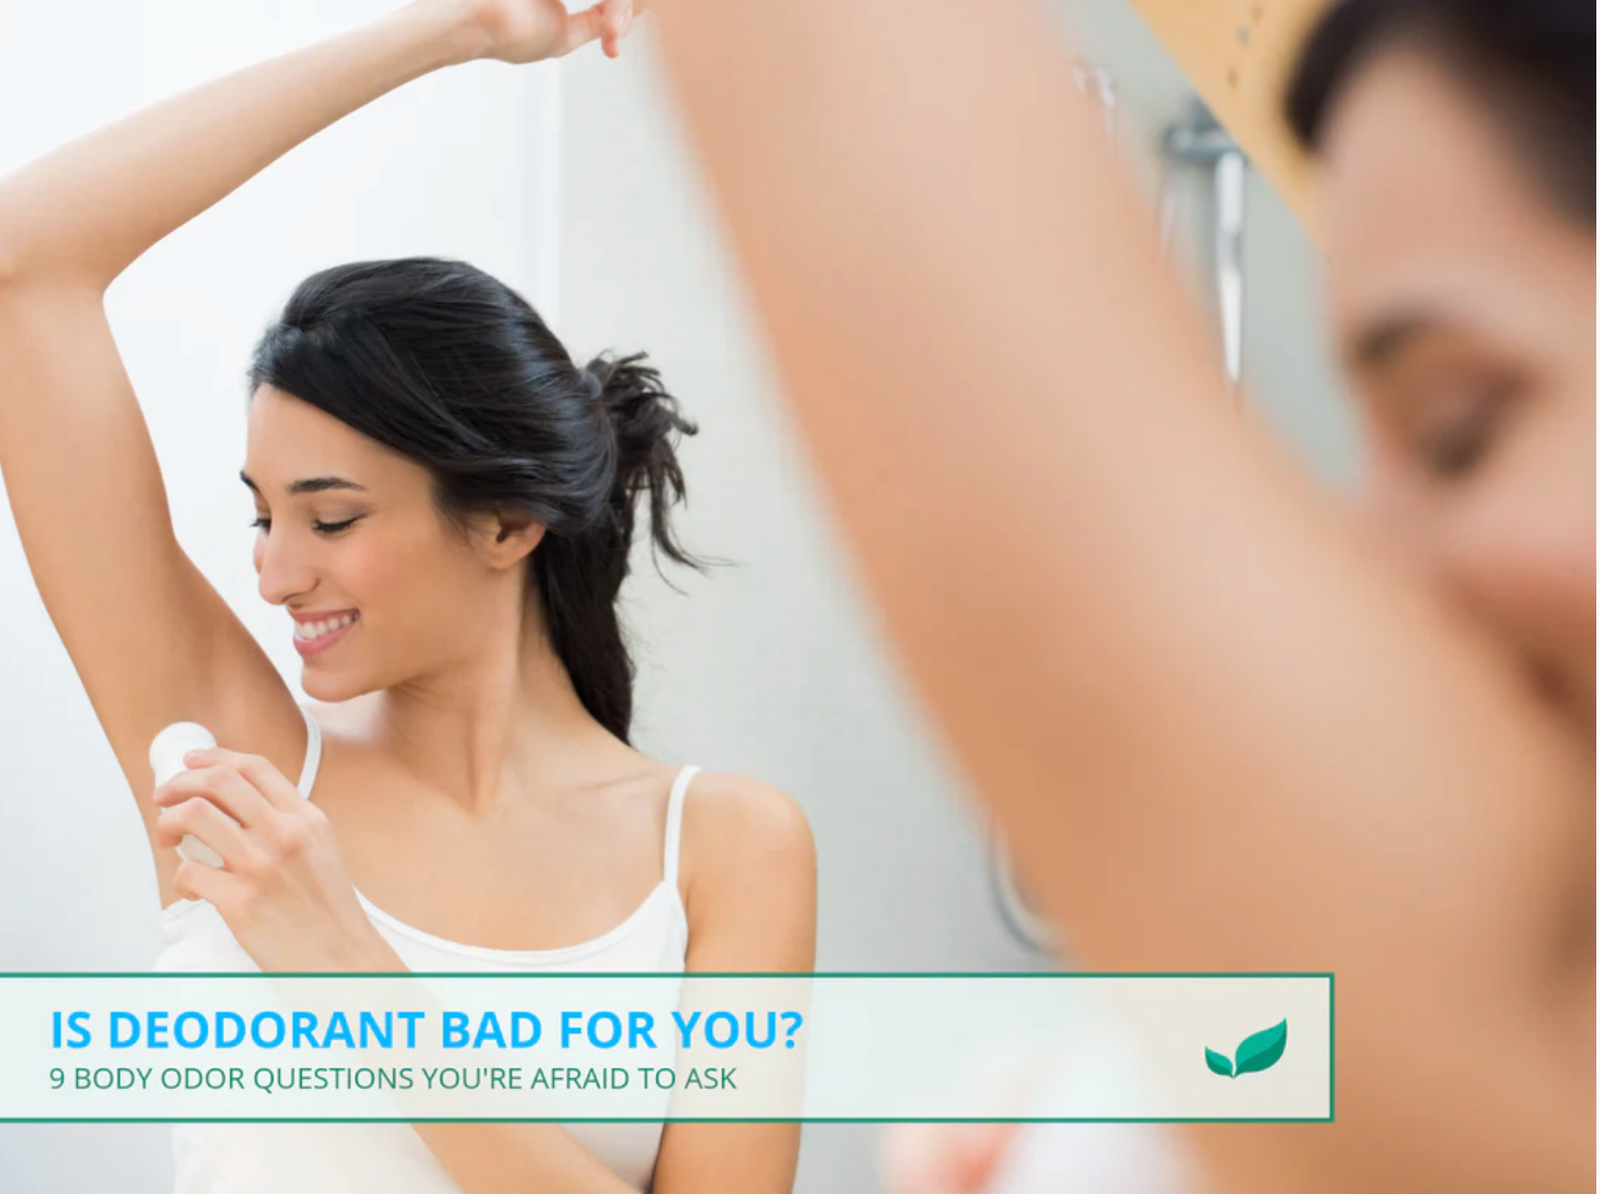 Is Deodorant Bad for You? 9 Body Odor Questions You're Afraid to Ask